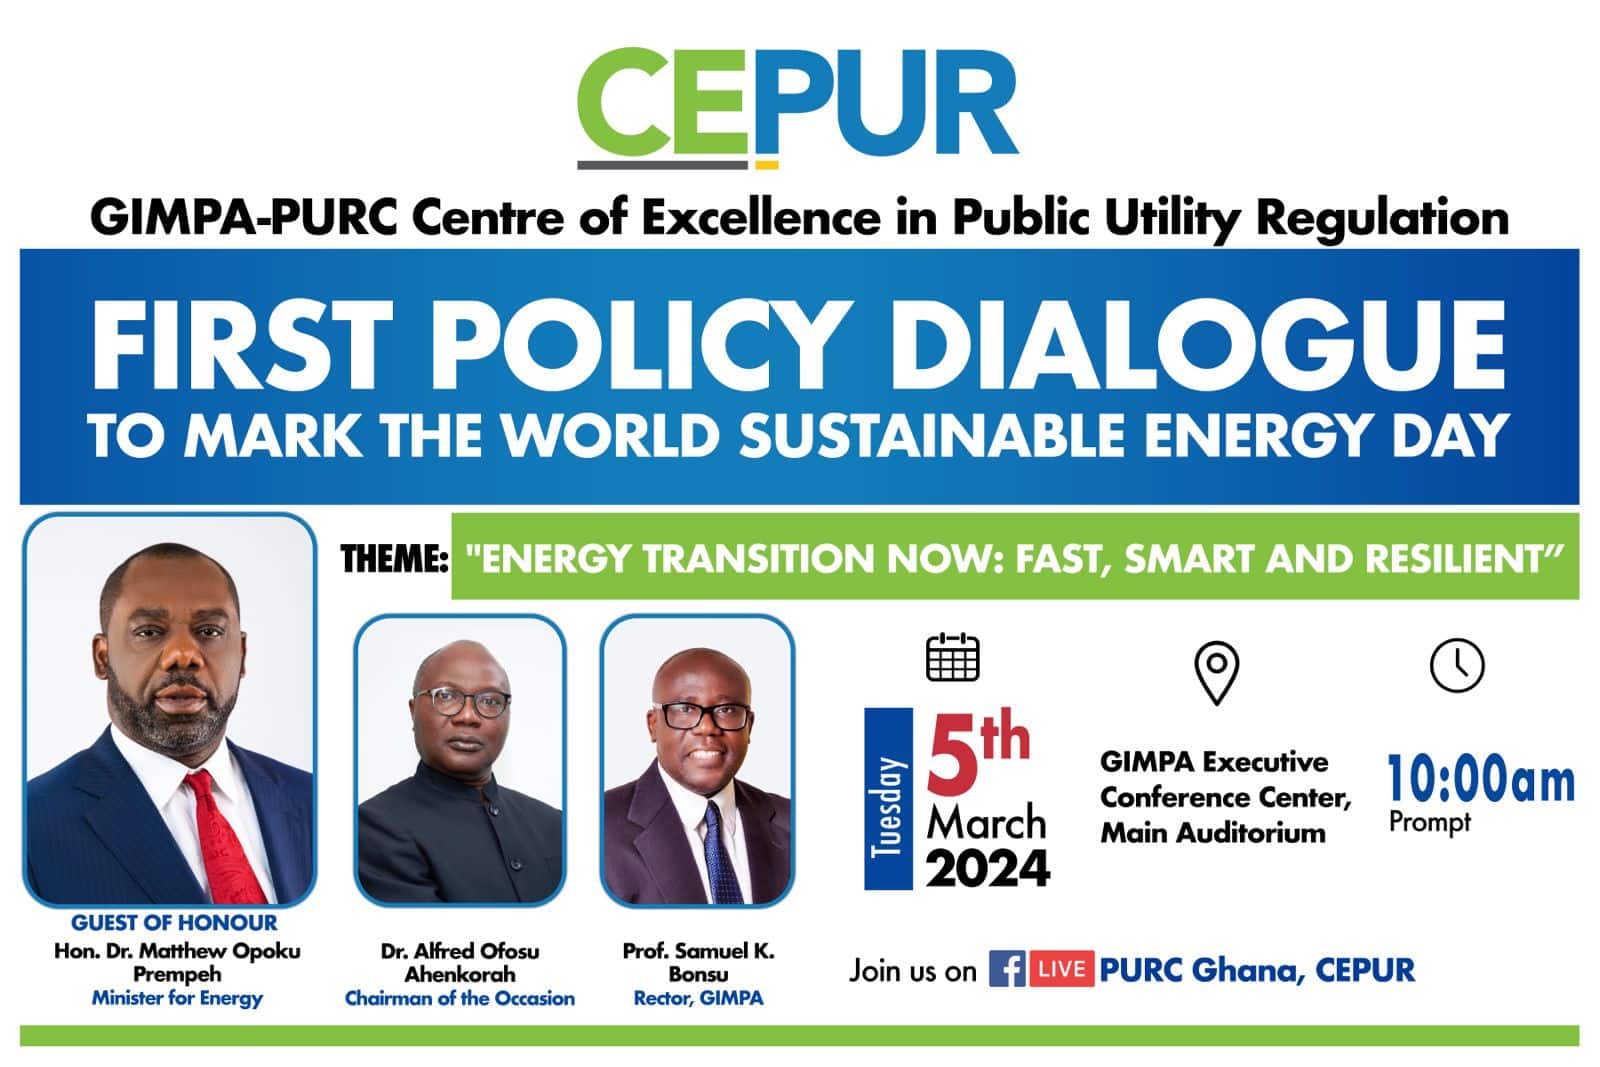 GIMPA-PURC Policy Dialogue to mark the World Sustainable Energy Day